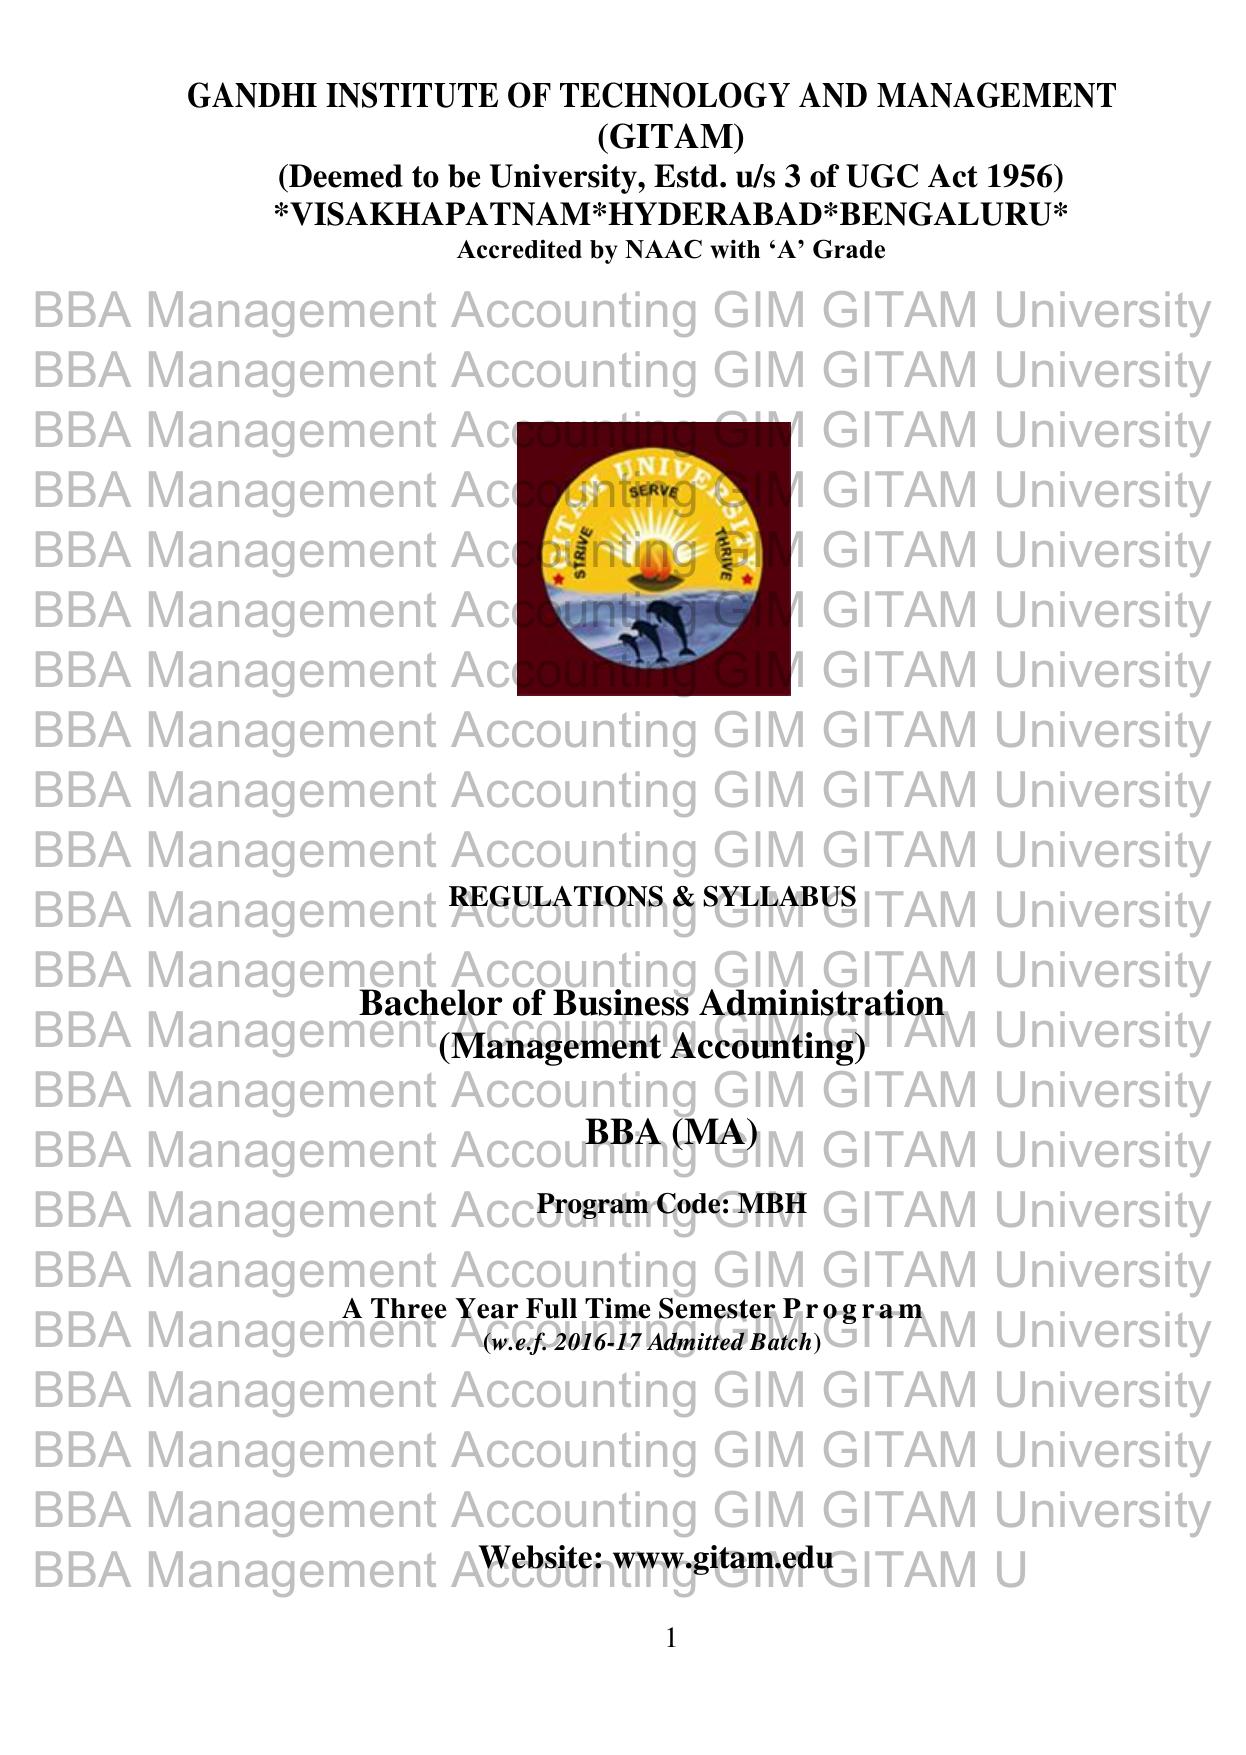 BBA (Management Accounting) 2017